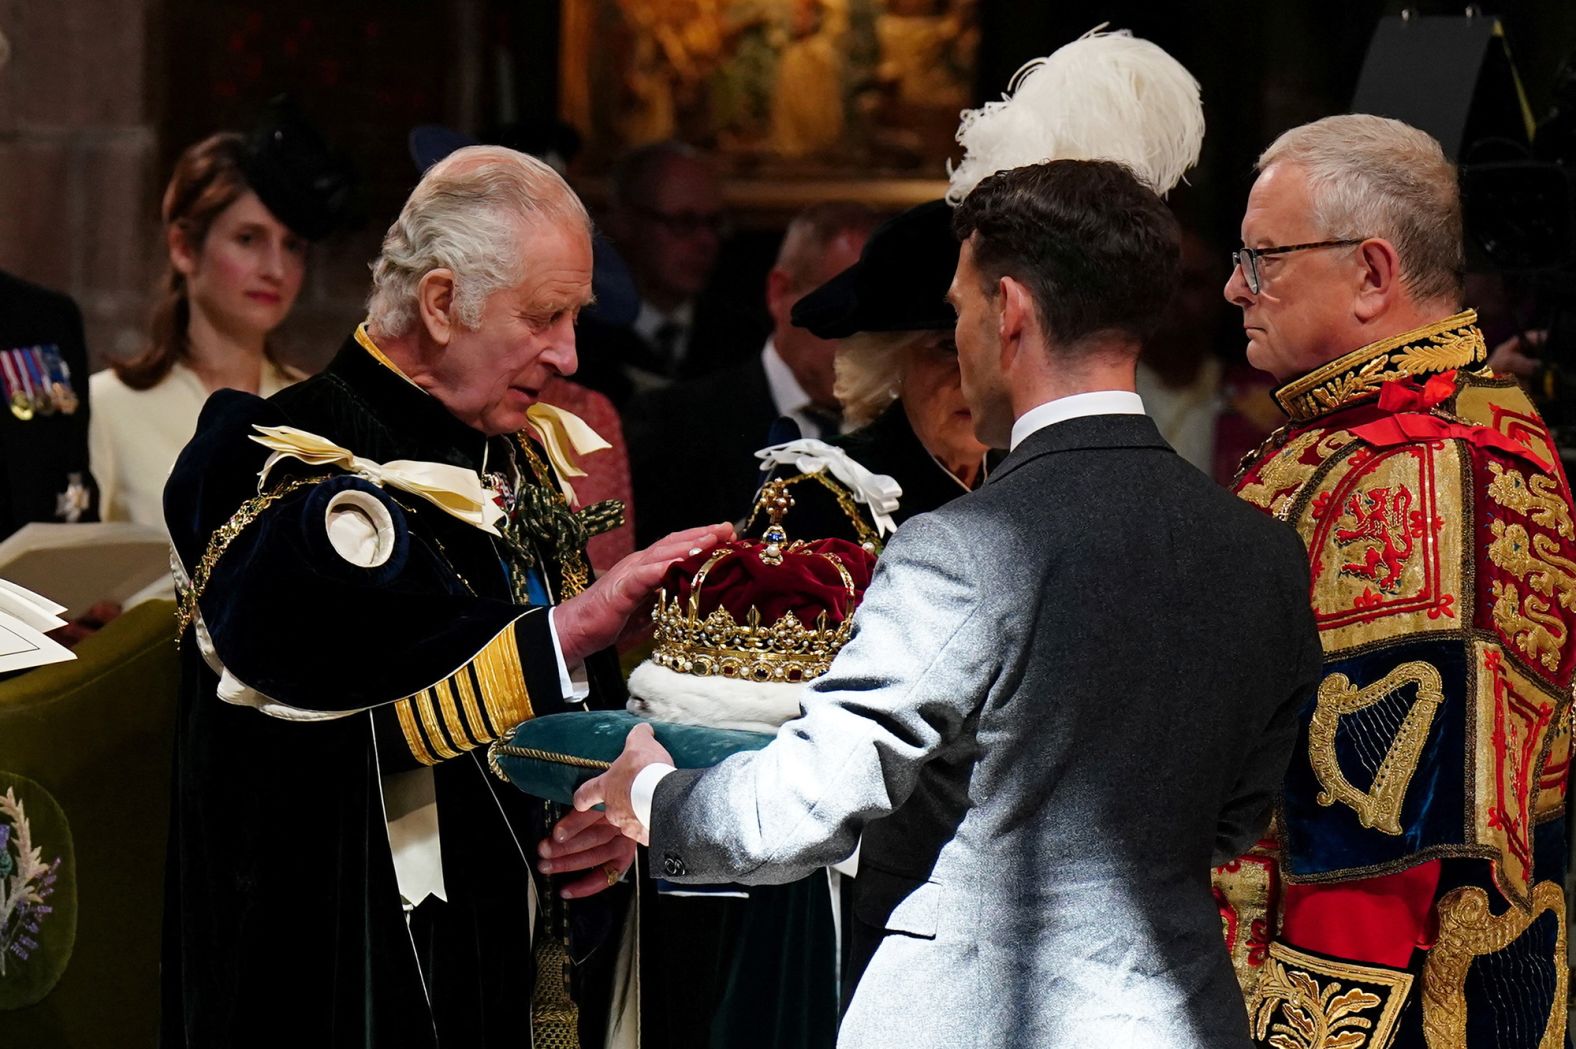 Charles is presented with the Crown of Scotland during a service of thanksgiving that was held at the St. Giles' Cathedral in Edinburgh, Scotland, in July 2023. Scotland was celebrating the King's recent coronation with a <a href="https://www.cnn.com/2023/07/05/europe/scotland-marks-coronation-charles-royals-gbr-intl/index.html" target="_blank">day of festivities</a>.